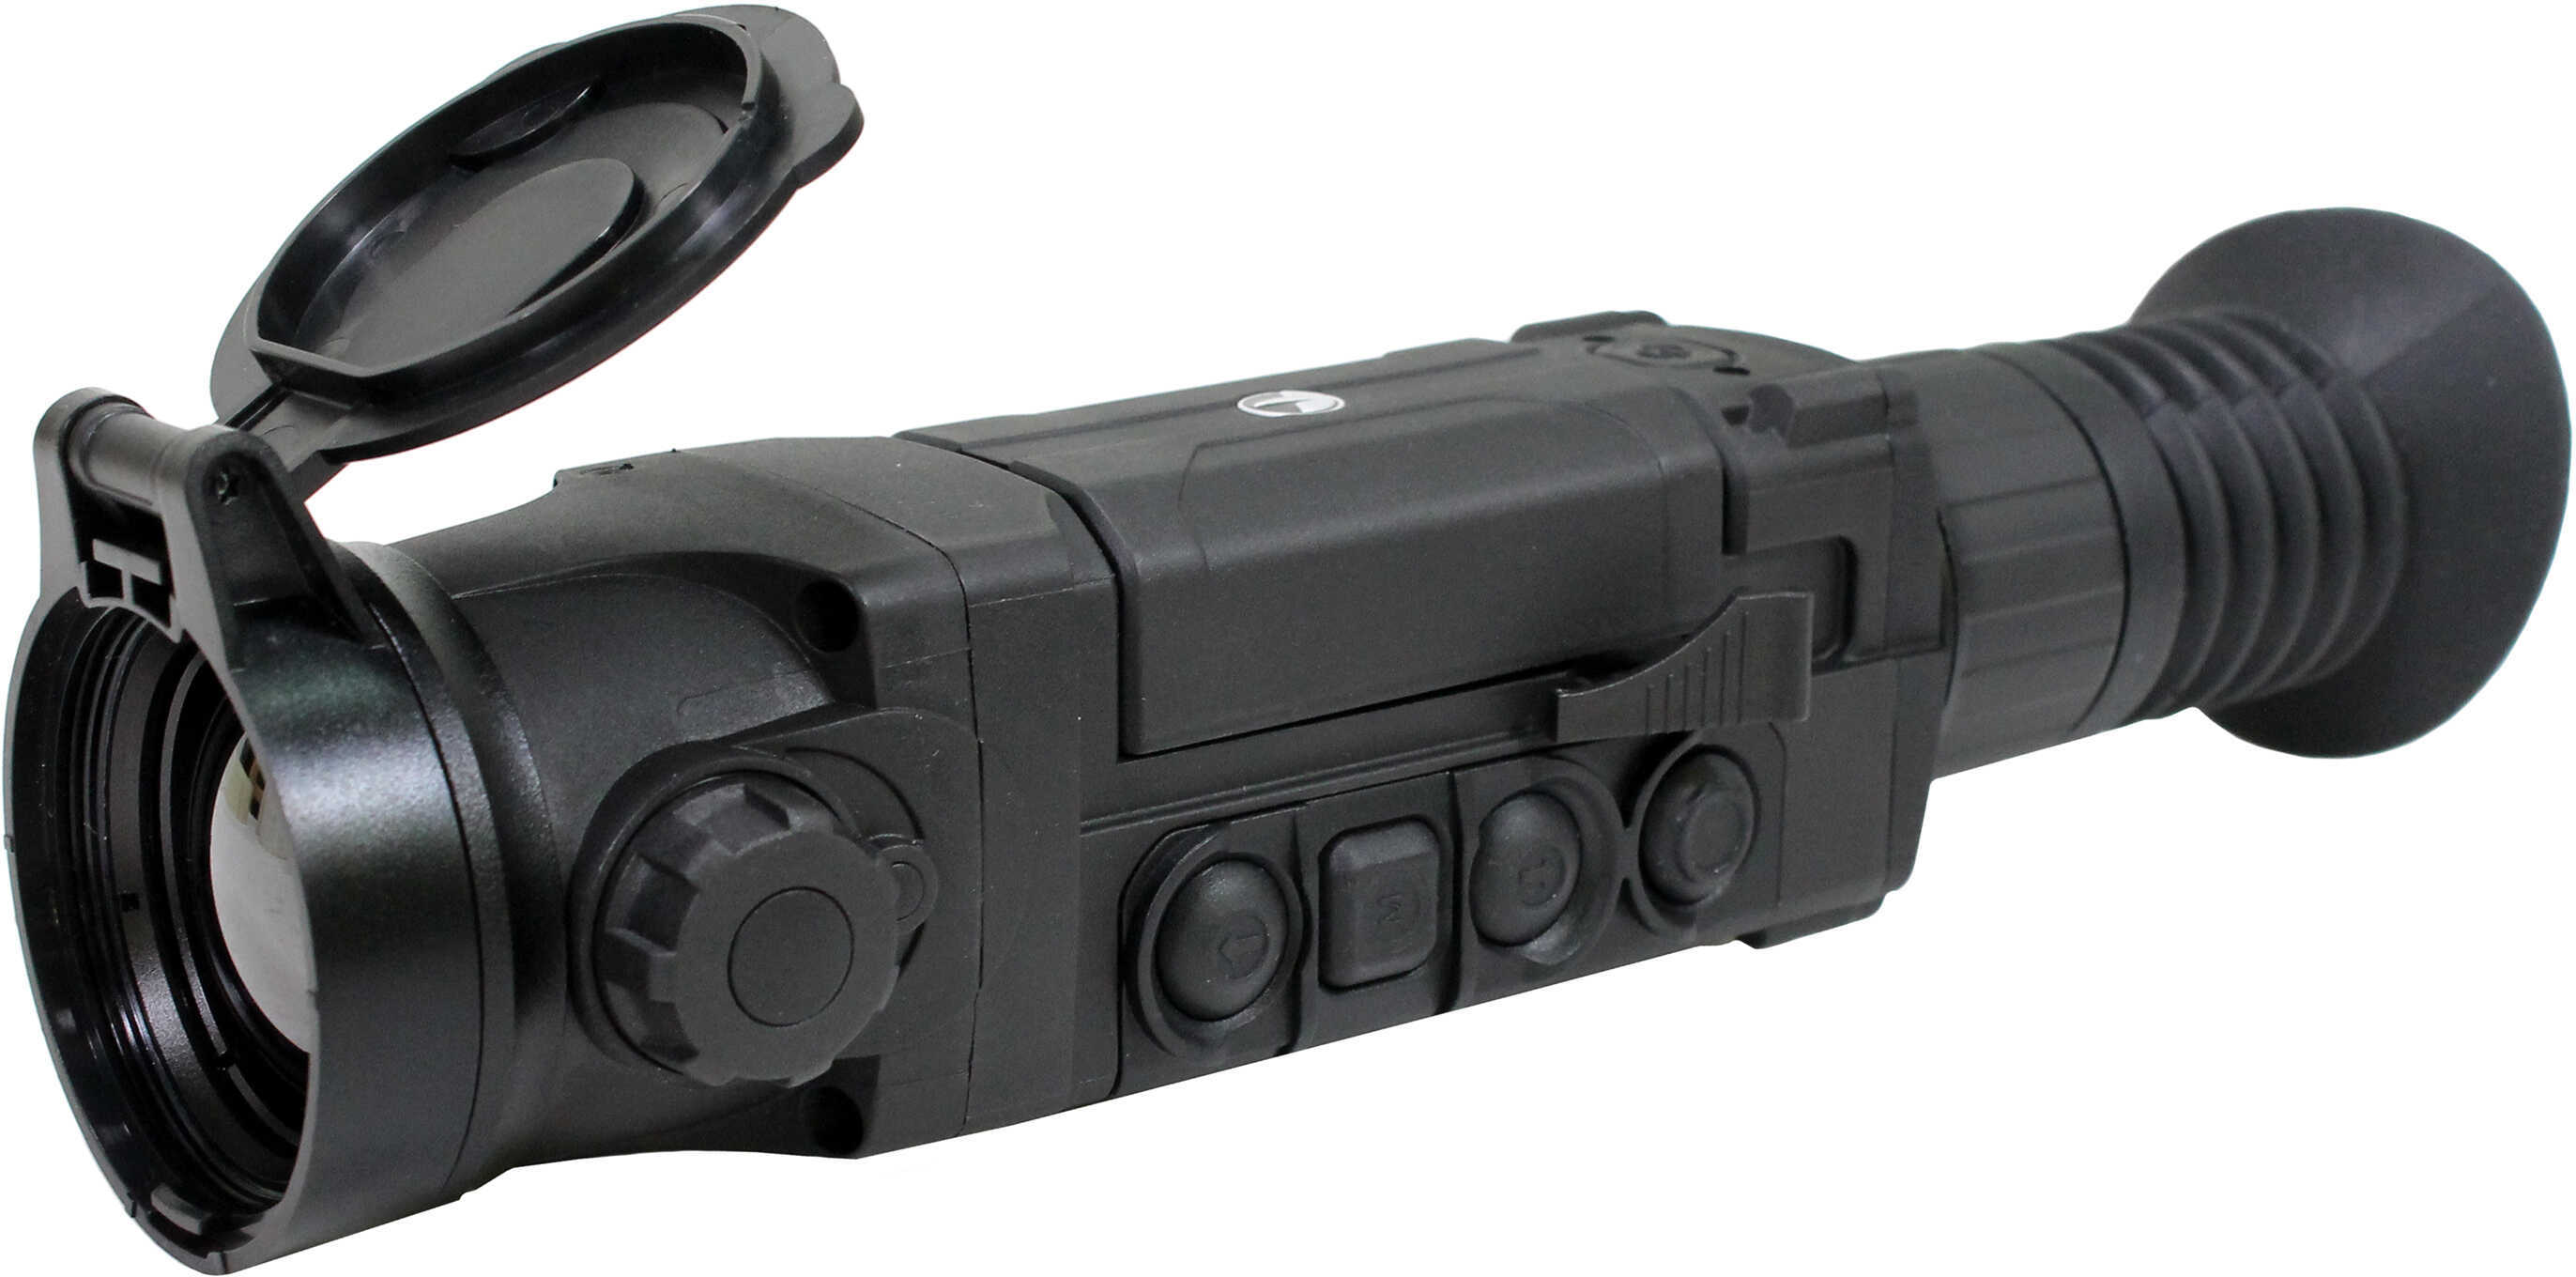 Thermal Imaging Scope Trail XP50 Md: PL76509Q